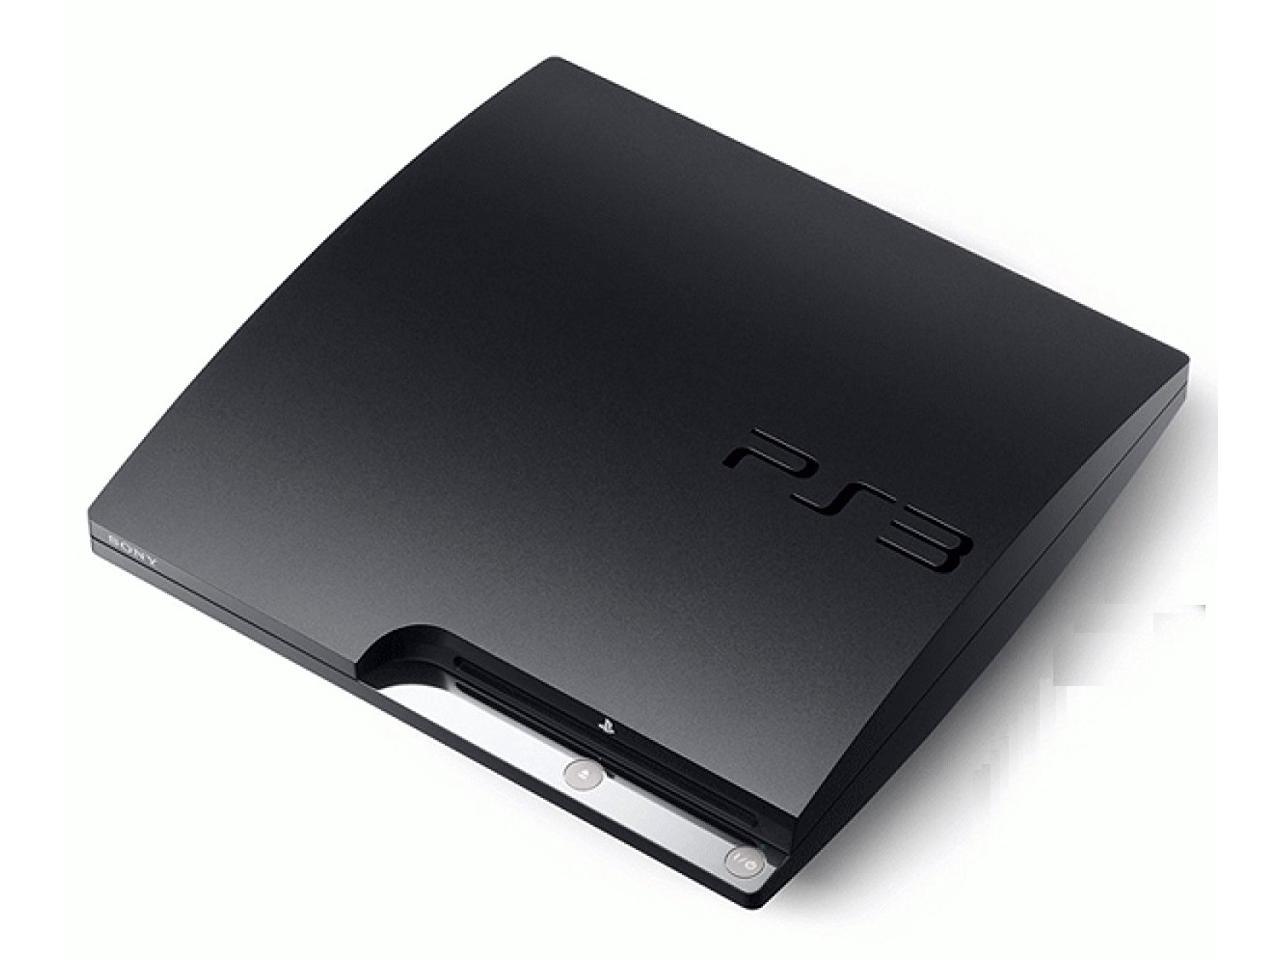 slids tortur Vil have Refurbished: Sony Playstation 3 PS3 Game System 250GB Core Slim (2101B)  CECH-2101B - Console Only - Newegg.com